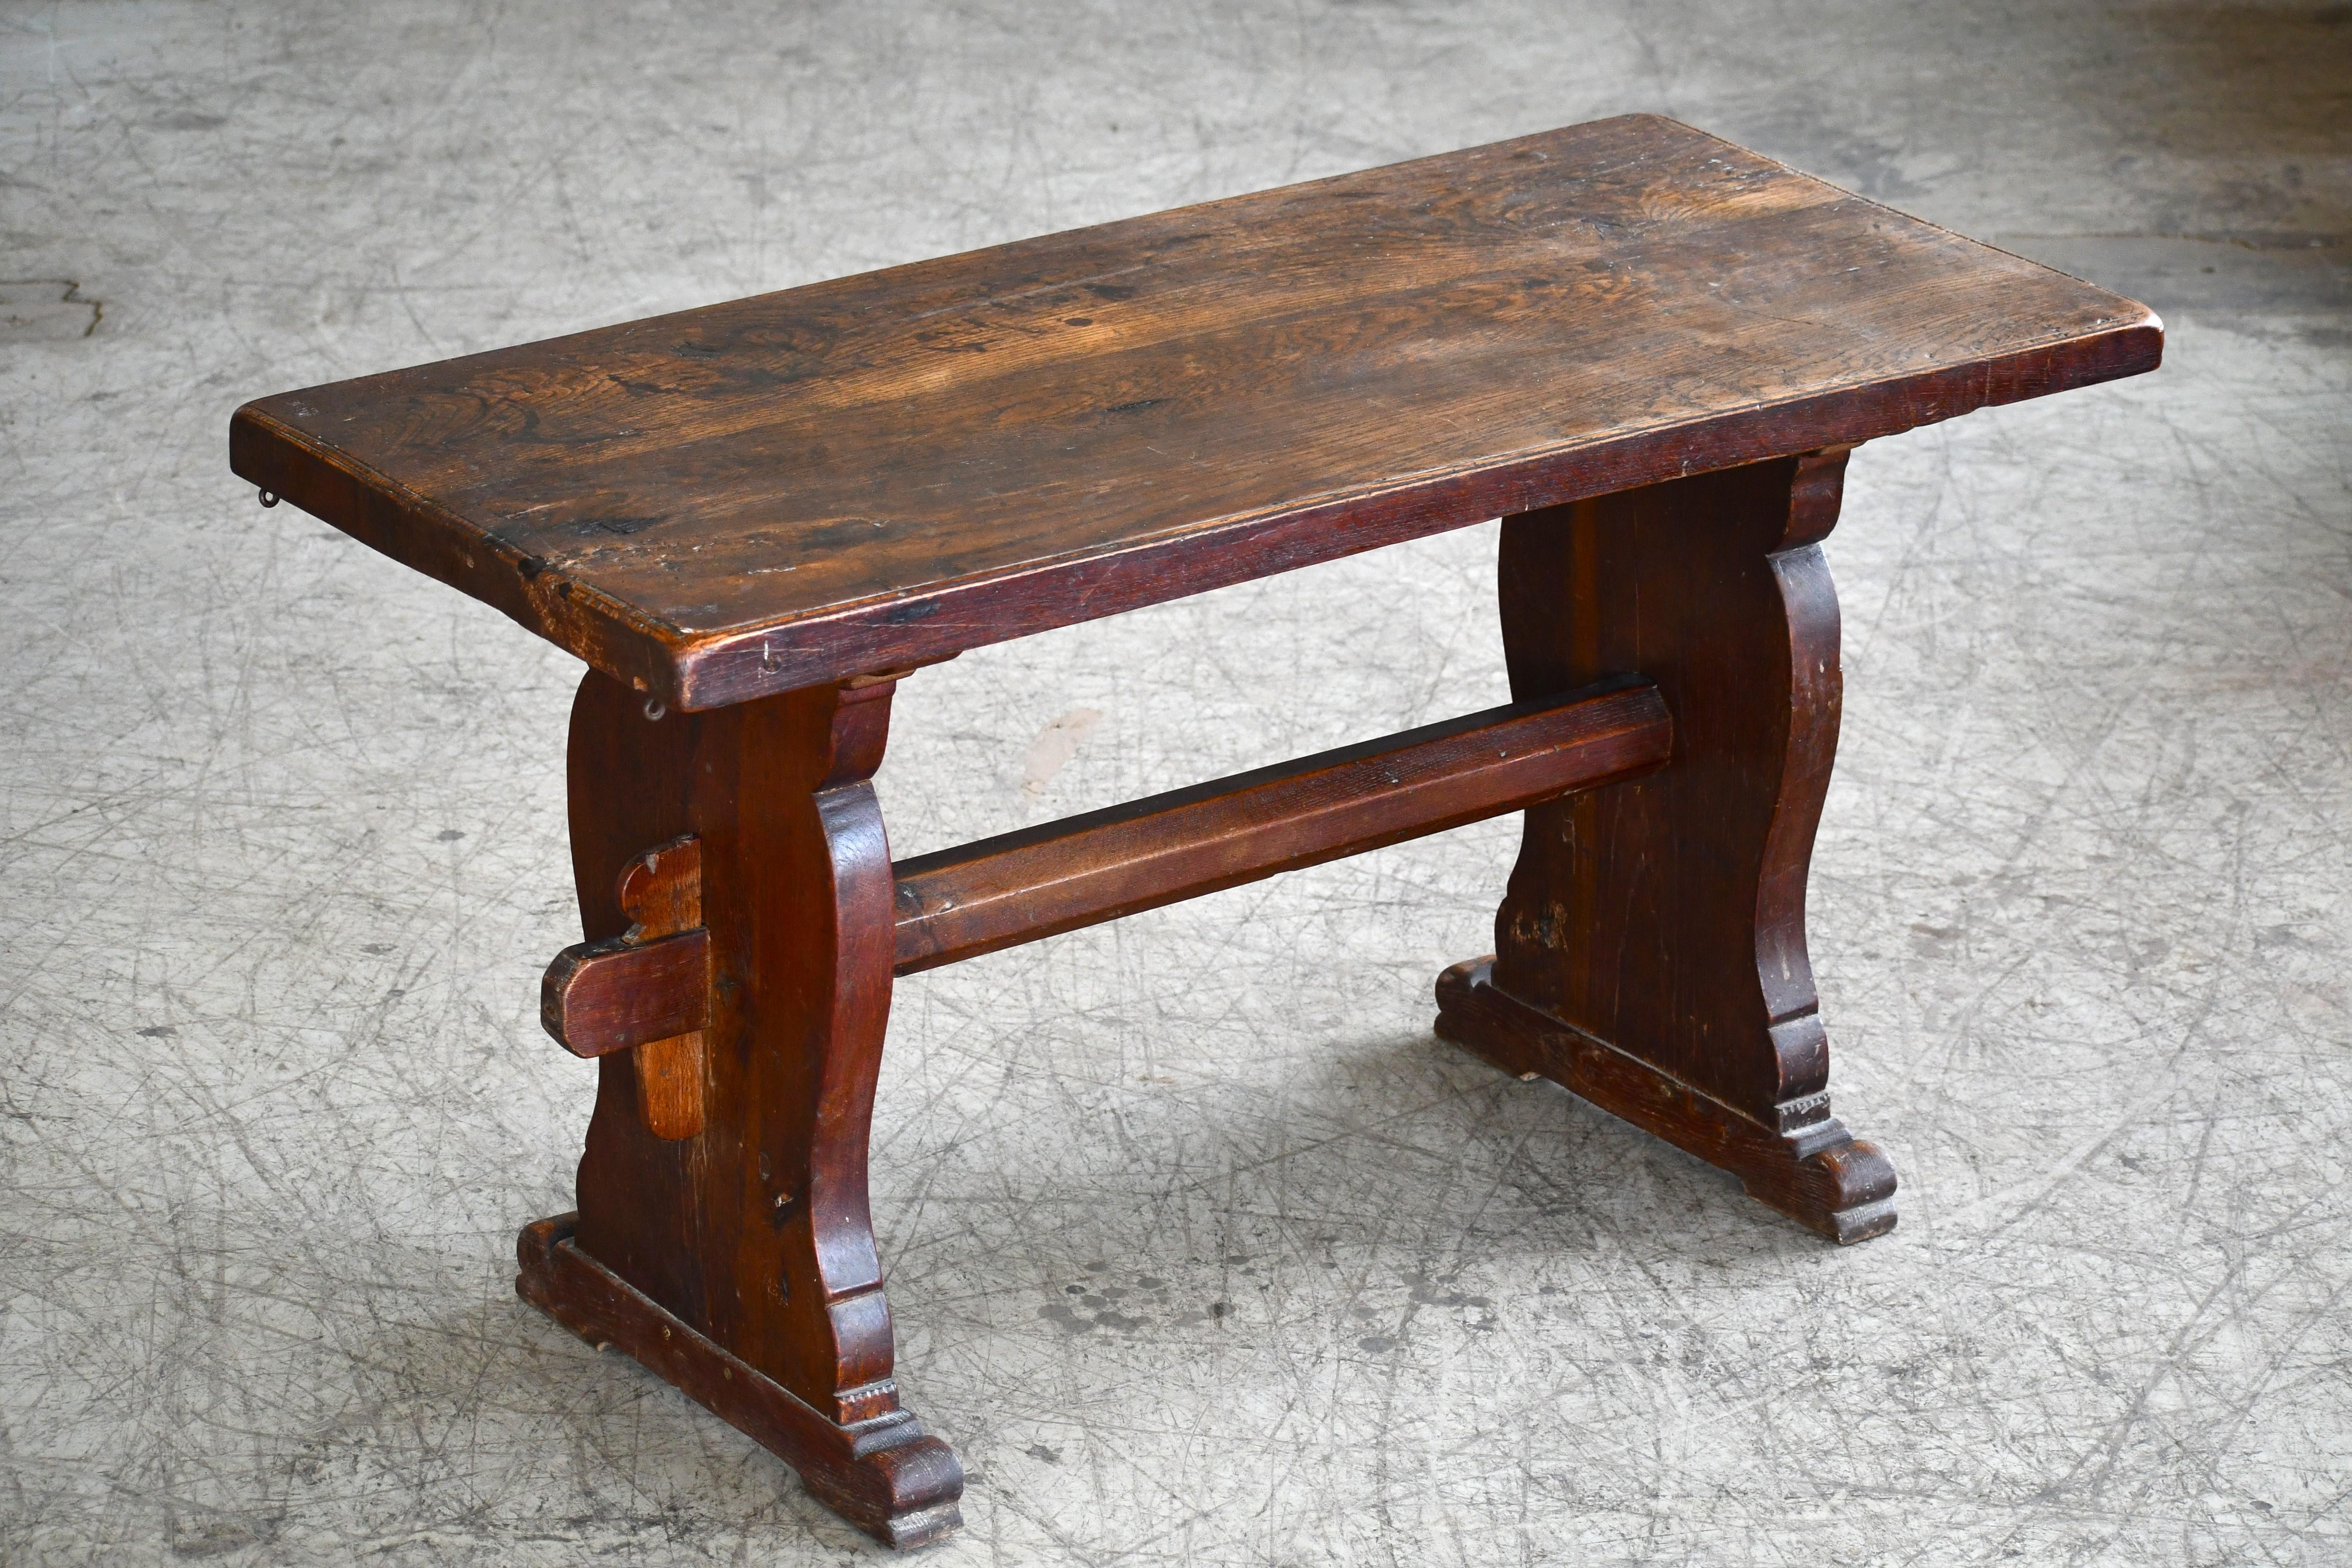 We found this charming country table in Denmark - entirely made of thick solid oak and held together without any use screw, nails or other hardware just tongue in groove and wooden pegs. Probably made around 1900 or late 1800's when these tables